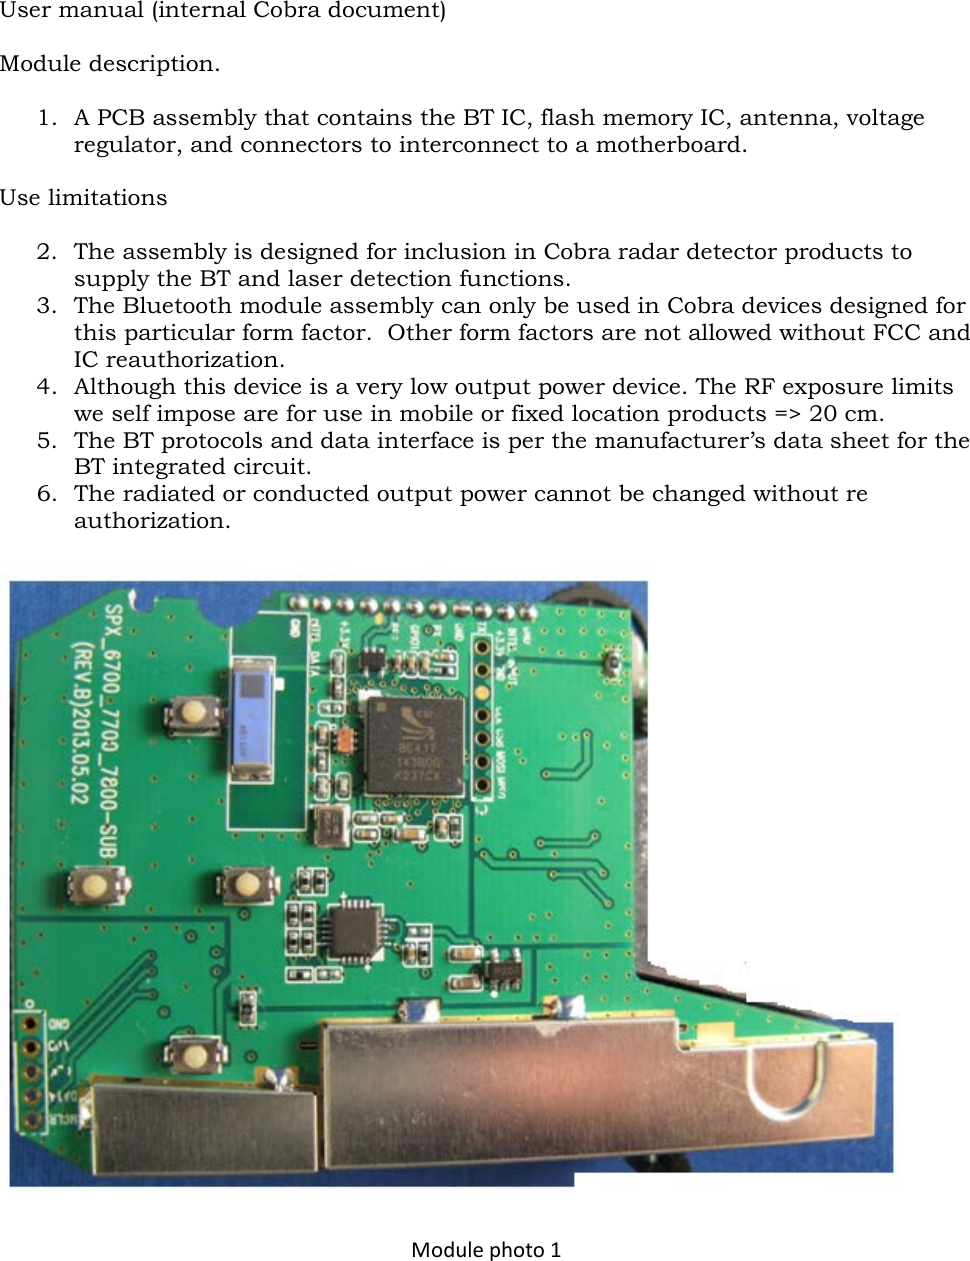 User manual (internal Cobra document)  Module description.  1. A PCB assembly that contains the BT IC, flash memory IC, antenna, voltage regulator, and connectors to interconnect to a motherboard.  Use limitations  2. The assembly is designed for inclusion in Cobra radar detector products to supply the BT and laser detection functions. 3. The Bluetooth module assembly can only be used in Cobra devices designed for this particular form factor.  Other form factors are not allowed without FCC and IC reauthorization. 4. Although this device is a very low output power device. The RF exposure limits we self impose are for use in mobile or fixed location products =&gt; 20 cm. 5. The BT protocols and data interface is per the manufacturer’s data sheet for the BT integrated circuit. 6. The radiated or conducted output power cannot be changed without re authorization.    Module photo 1 